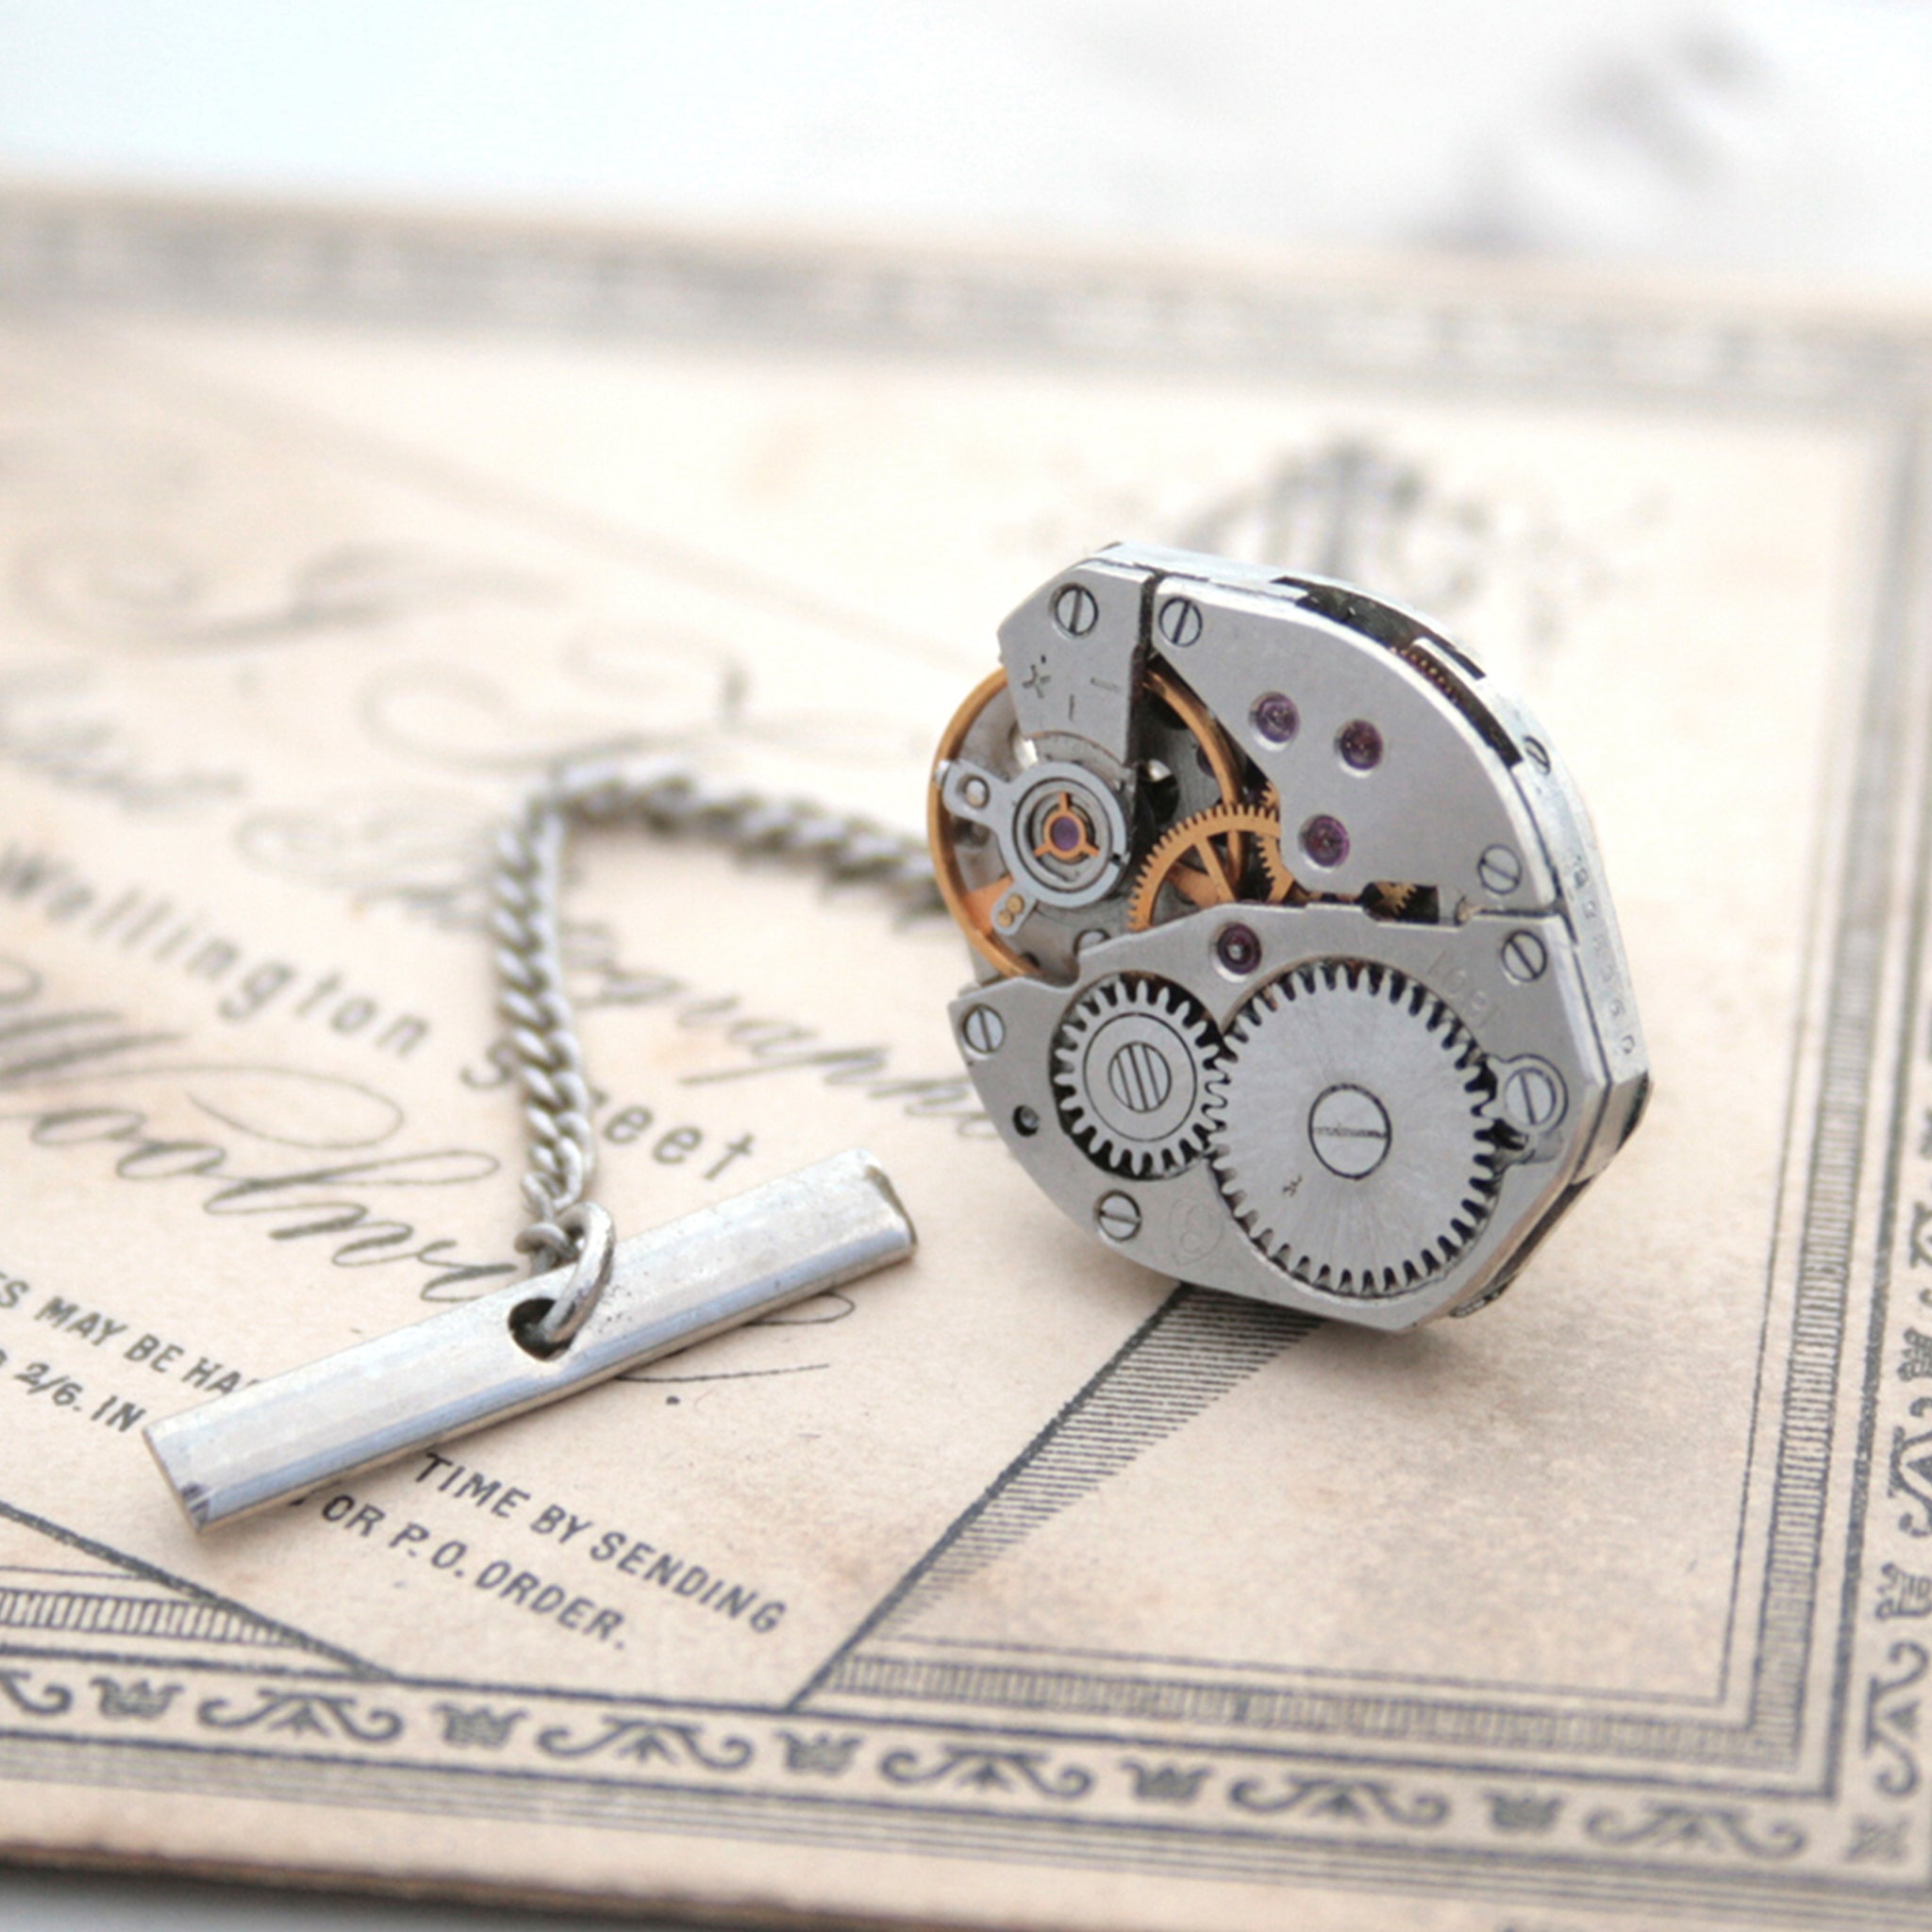 Steam punk tie tack with chain made of real watch